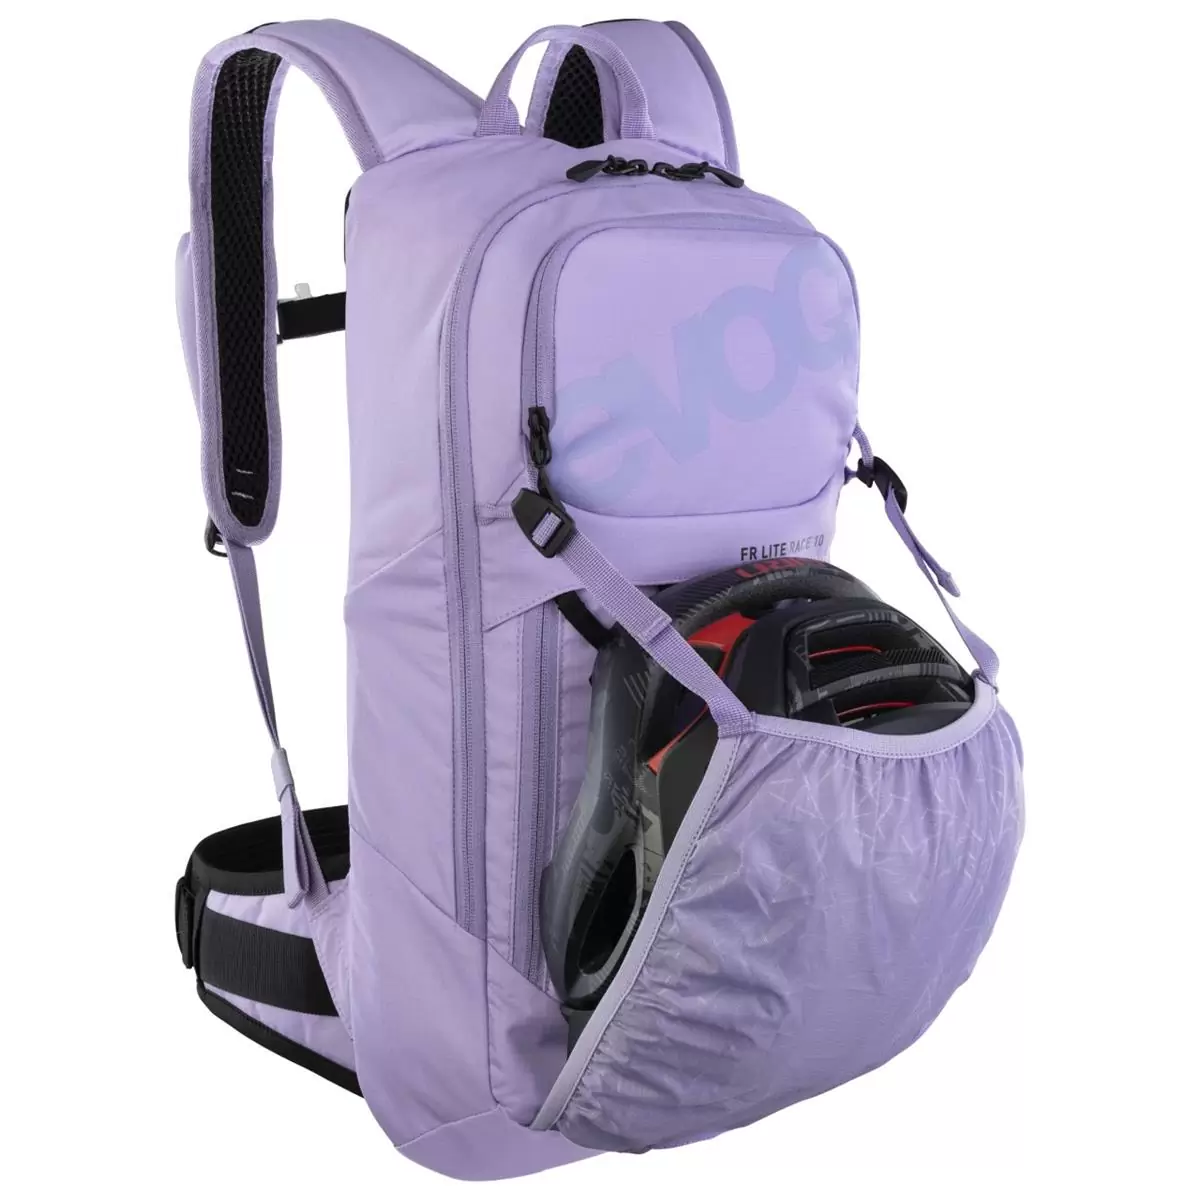 FR LITE RACE 10 Backpack With Back Protector 10L Purple Size M/L #3